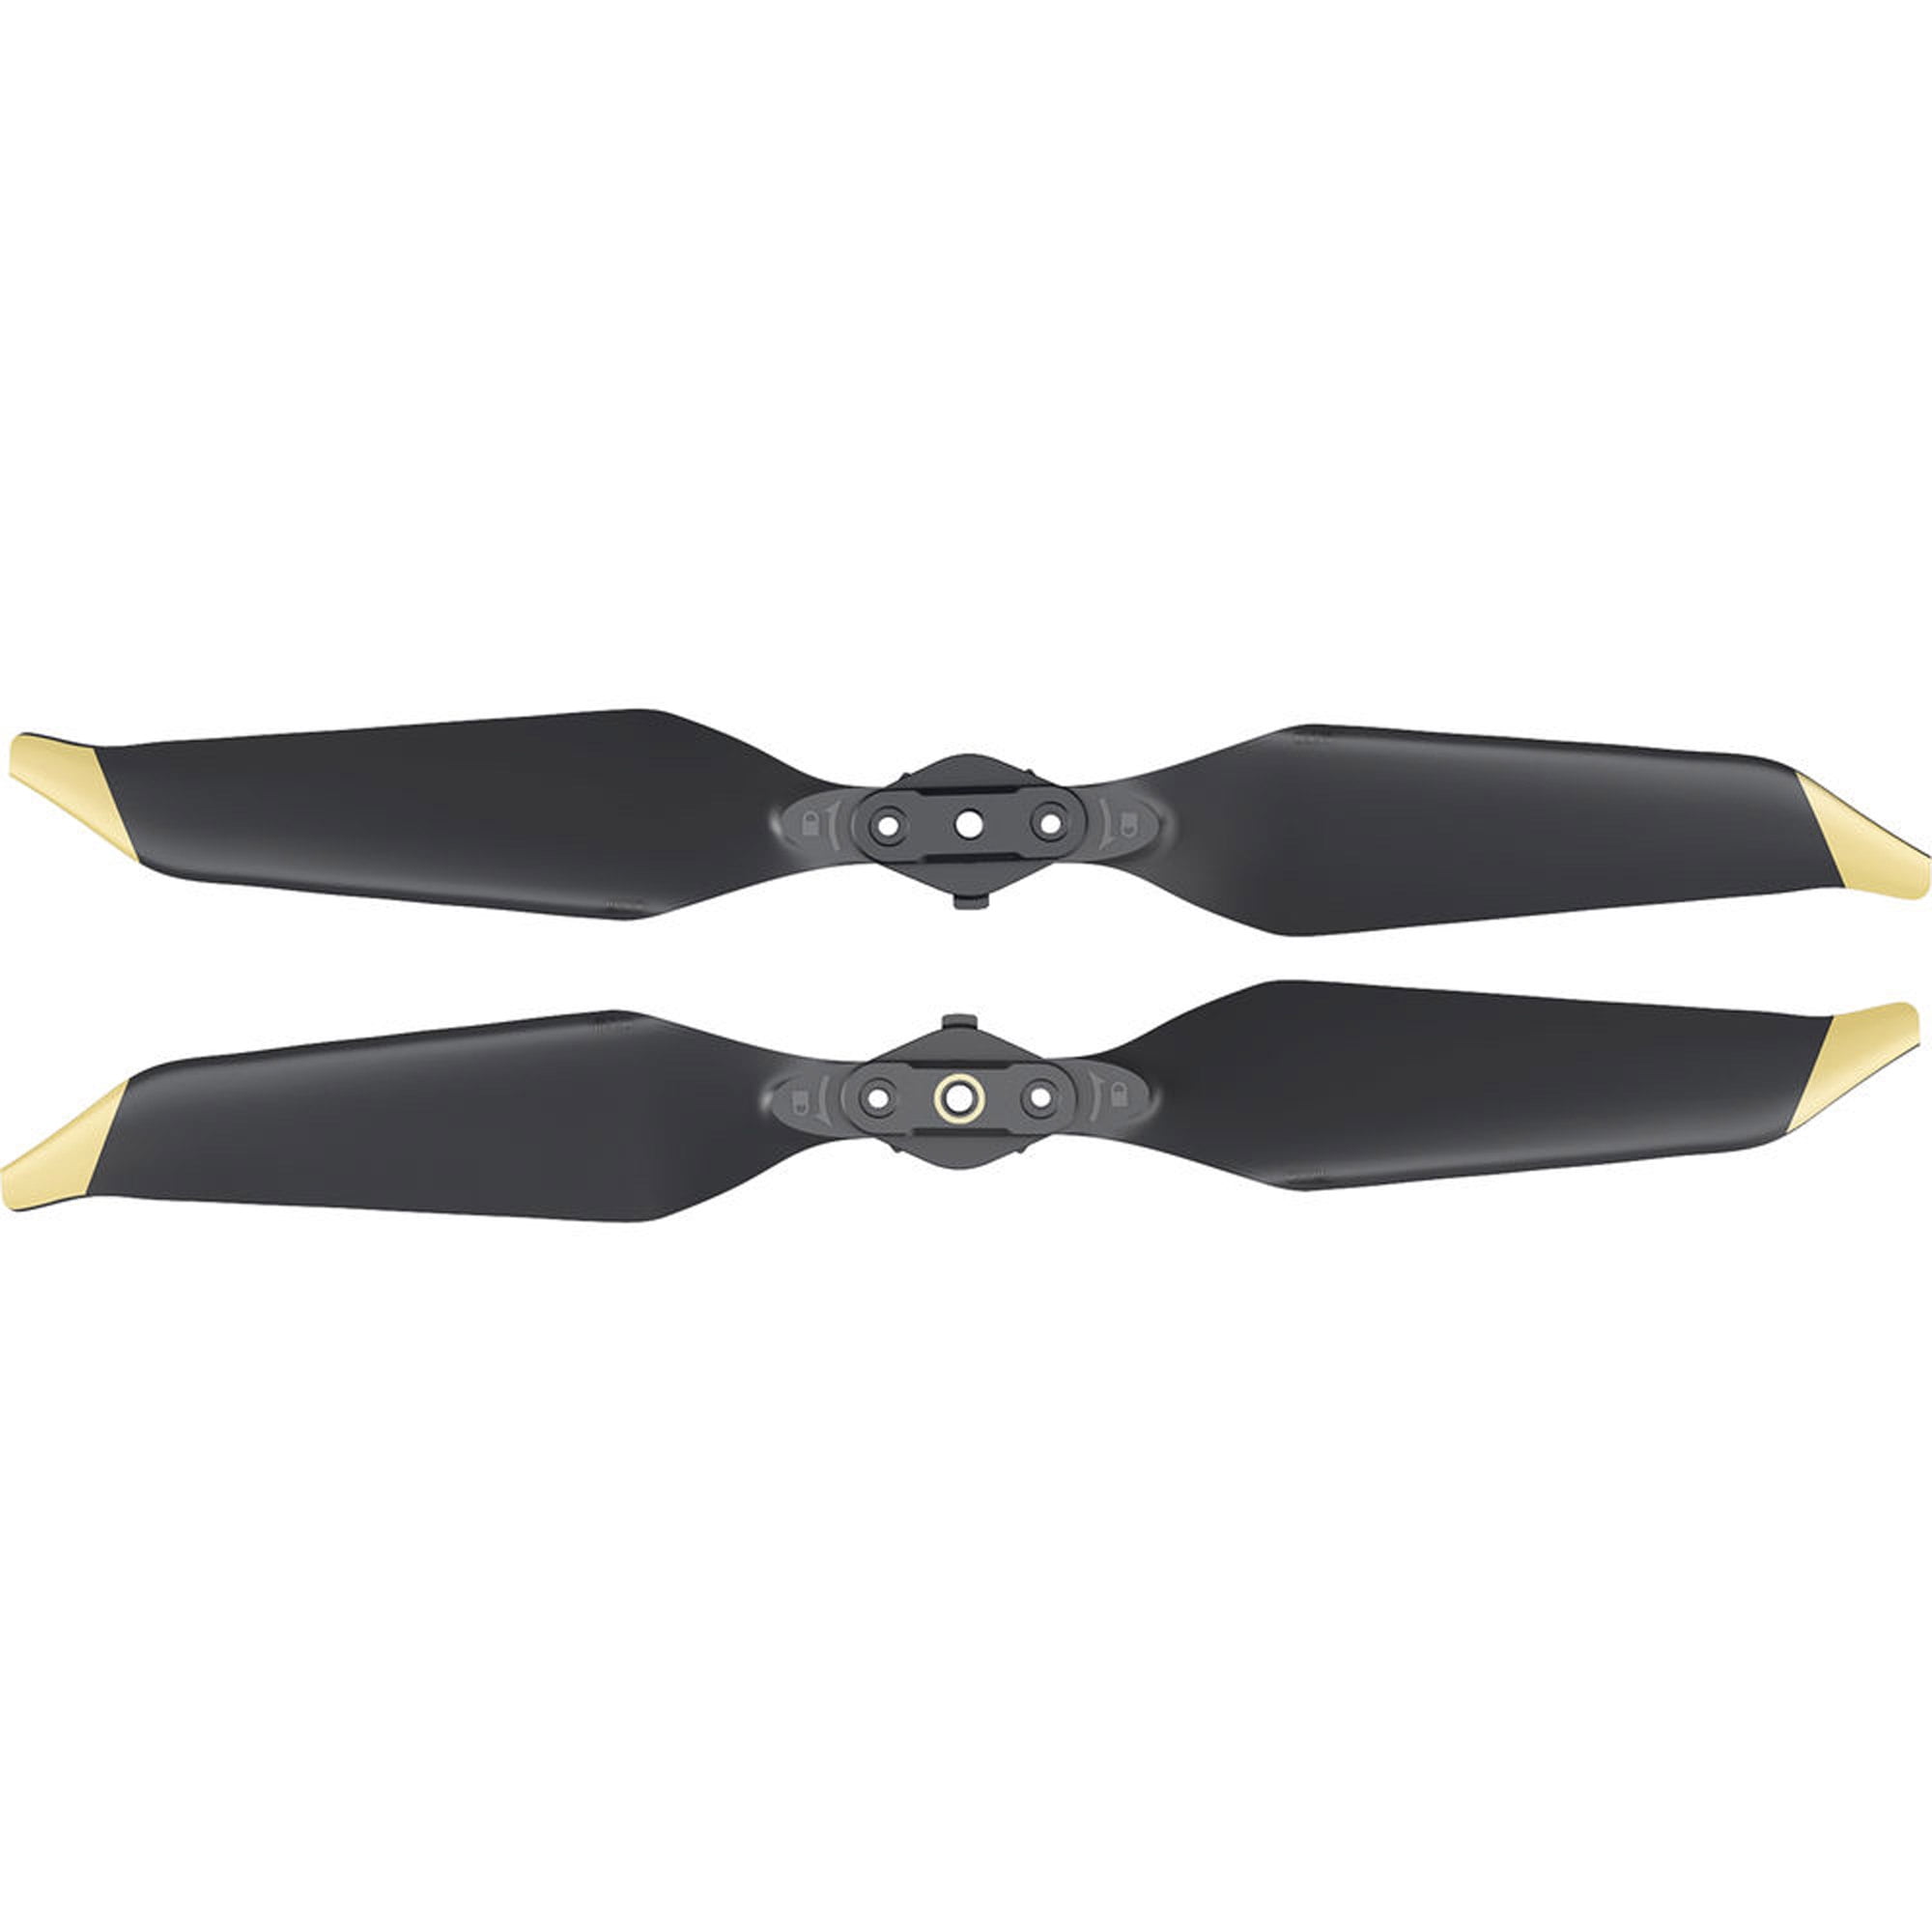 4x Genuine DJI Mavic Air 2S Props Propellers Quick Release Folding Low Noise 